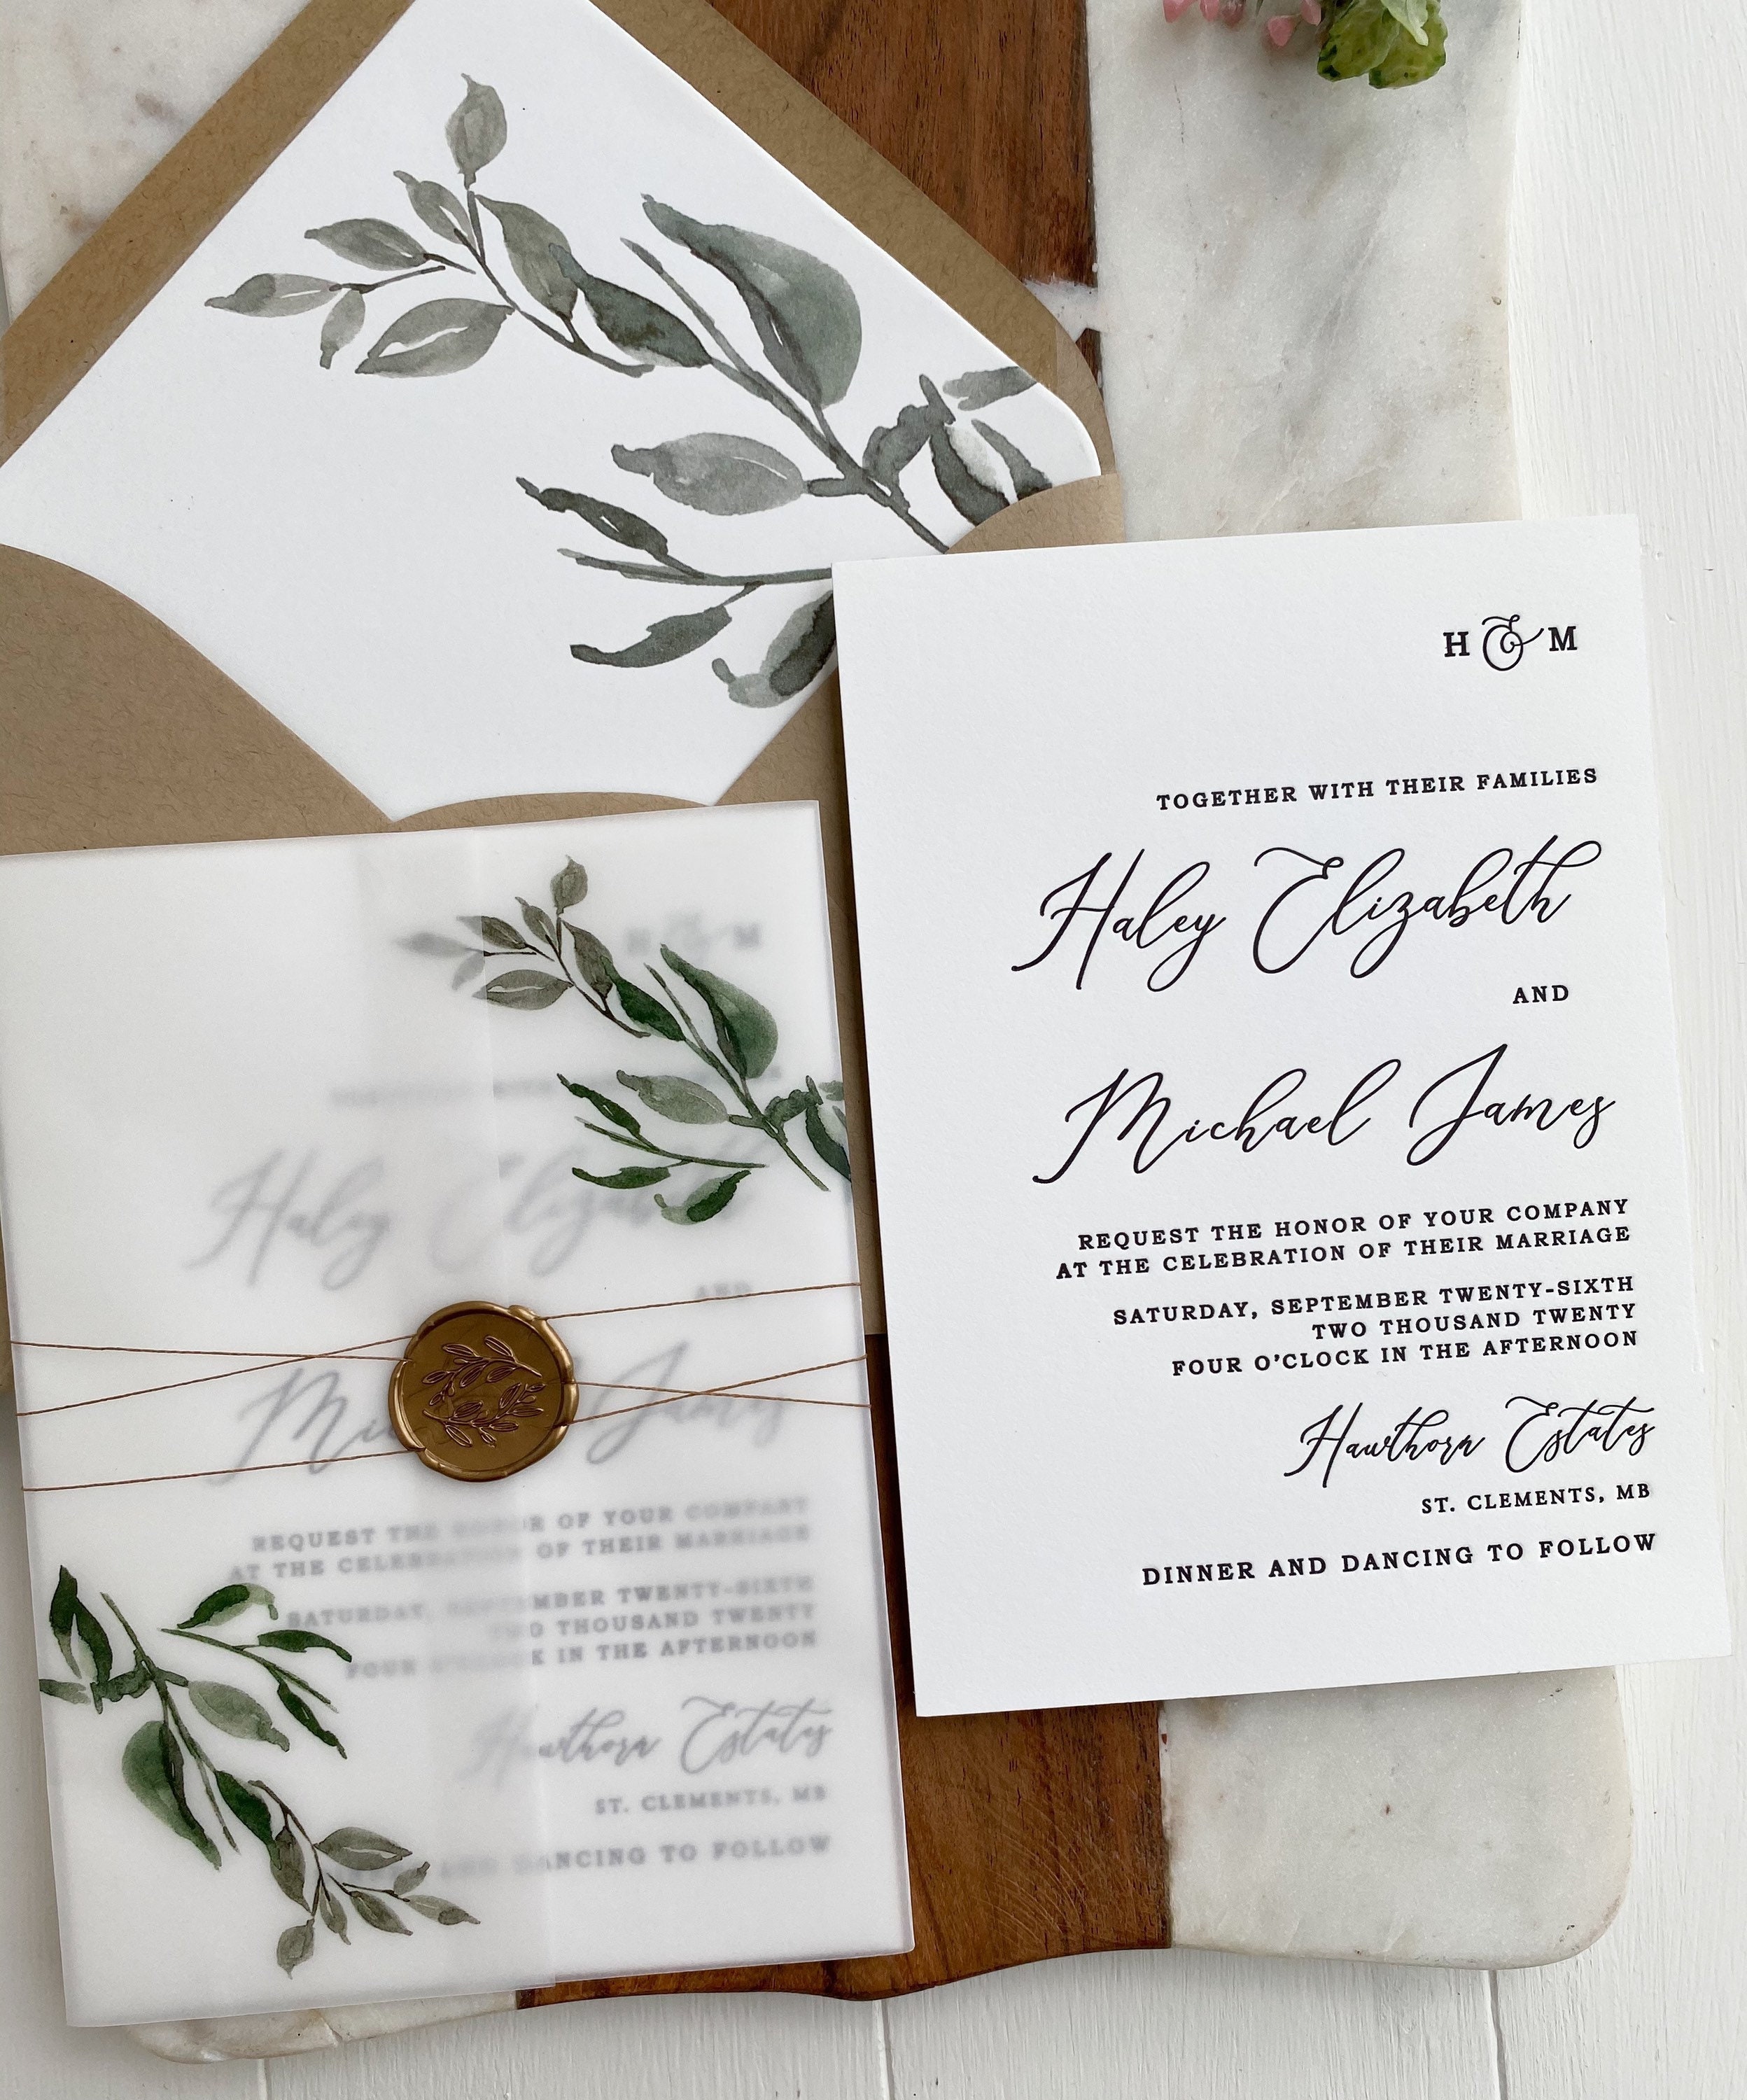 Blush Floral and Gold Wax Seal Vellum Wrap Jacket for DIY Wedding  Invitation - Cotton Willow Design Co.